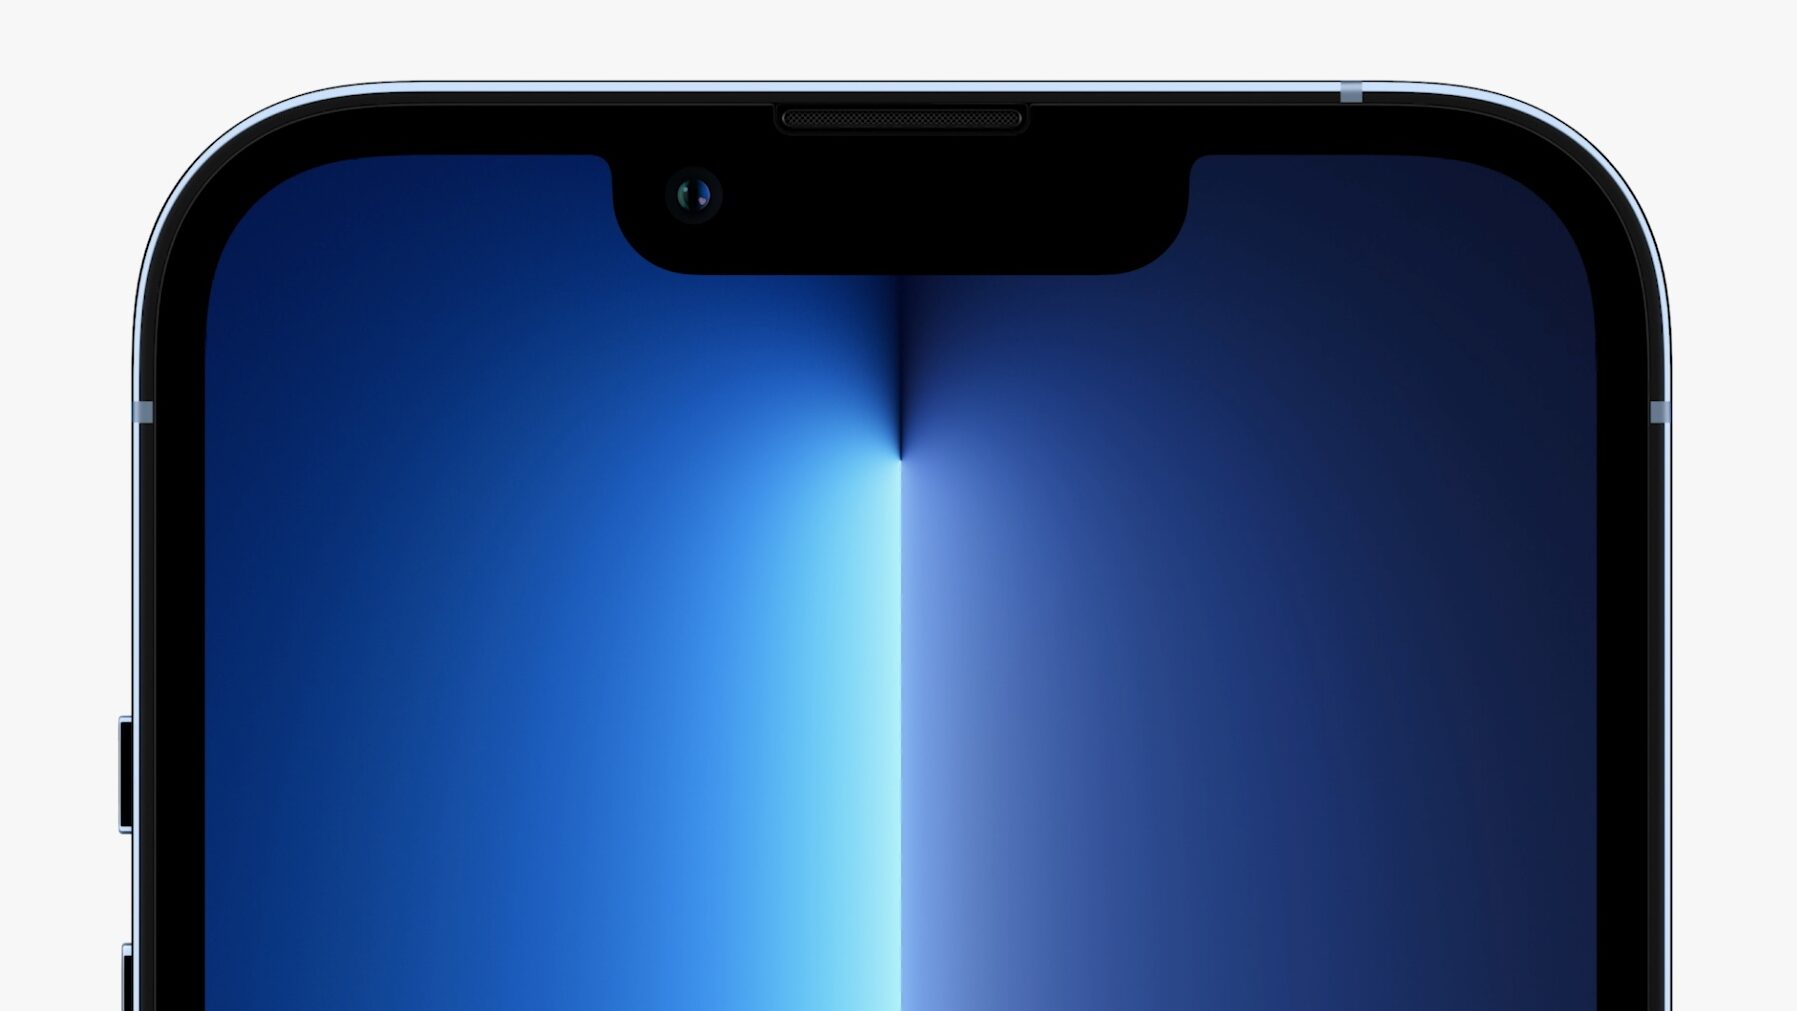 Apple's marketing image illustrating a smaller notch on the iPhone 13 Pro